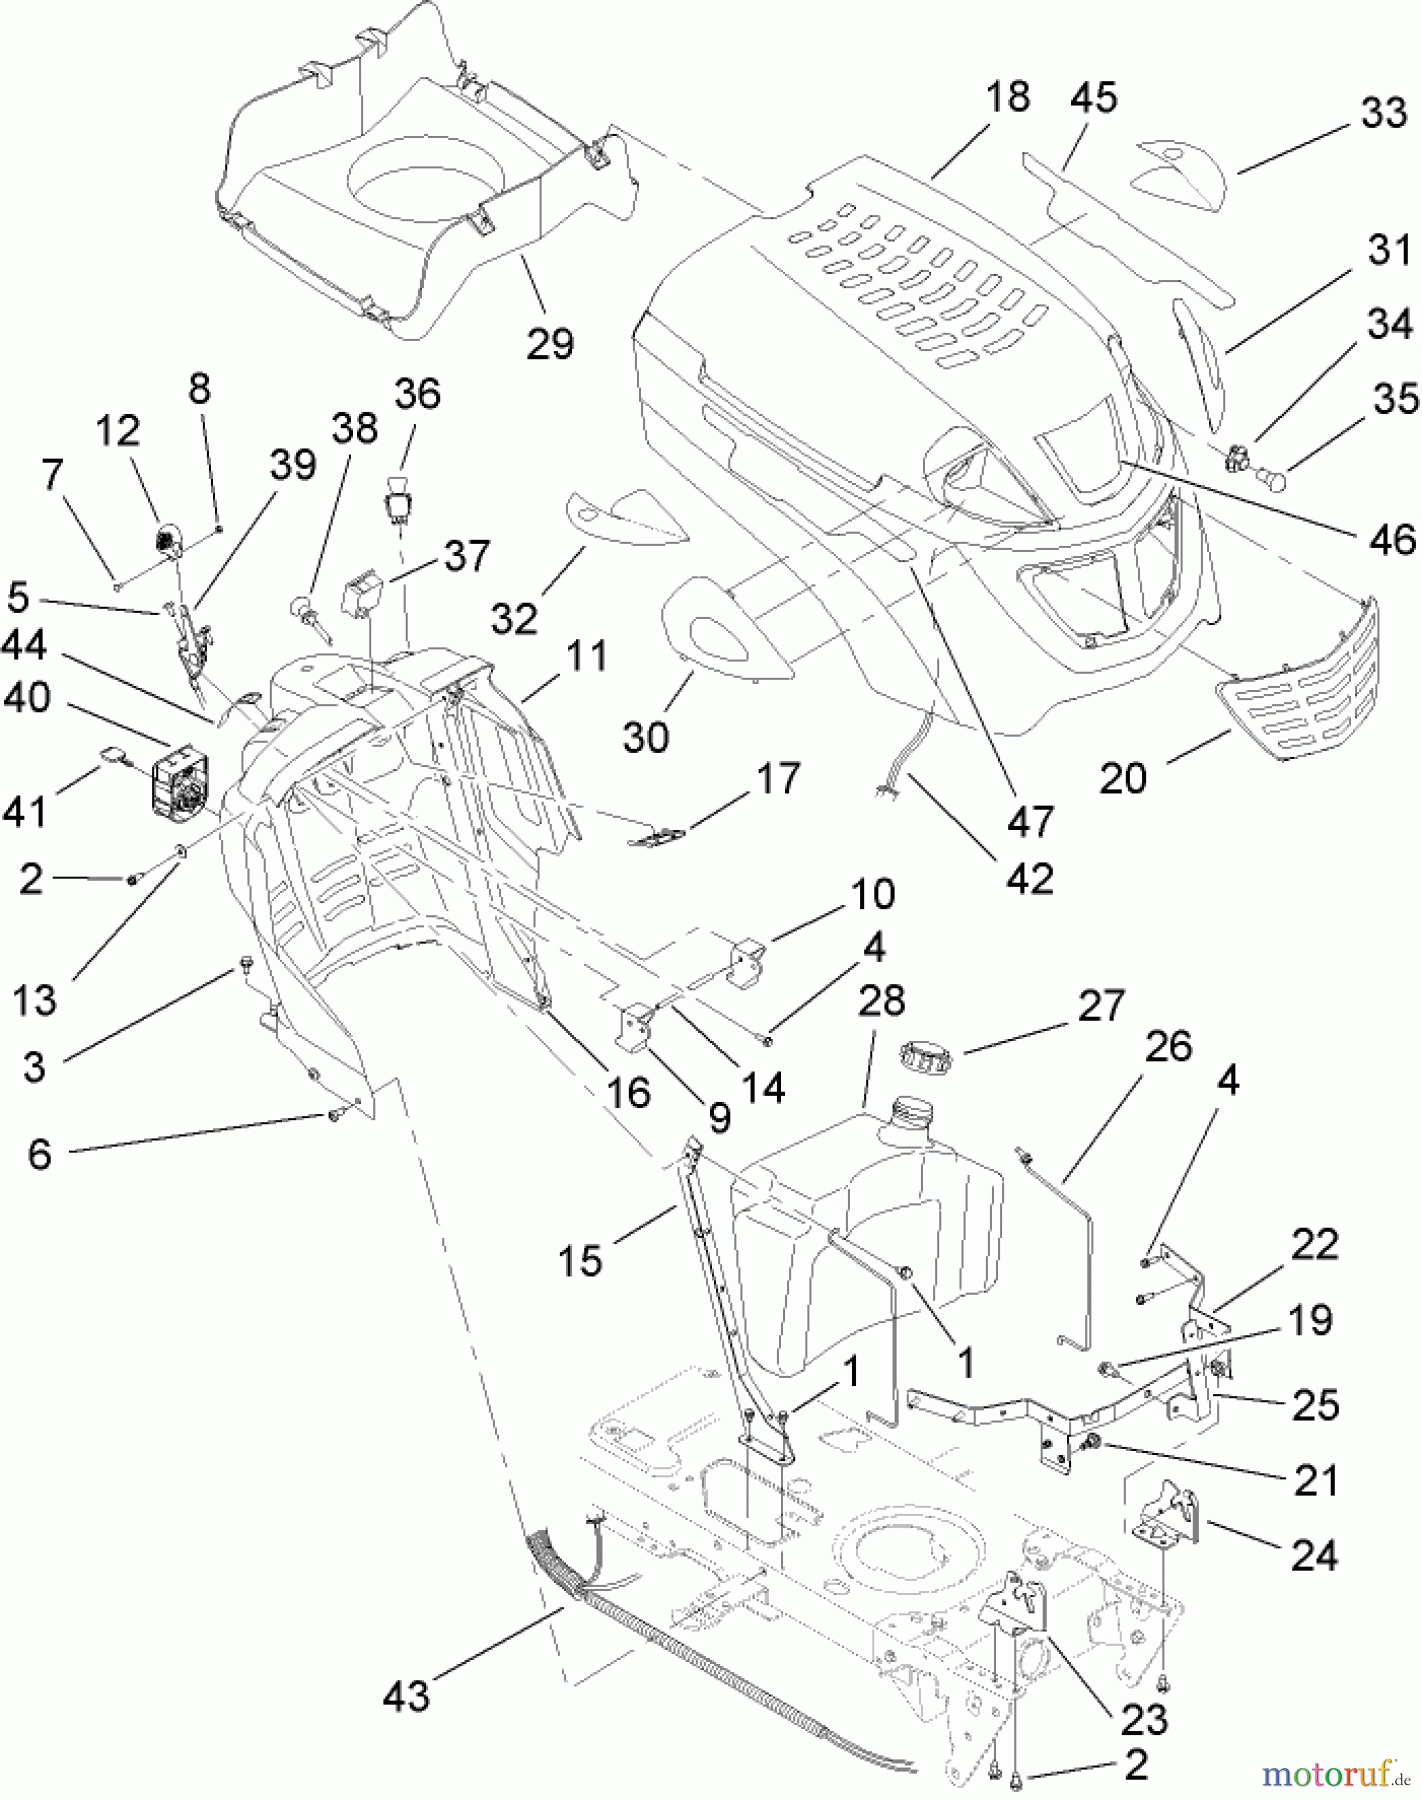  Toro Neu Mowers, Lawn & Garden Tractor Seite 1 13AP60RP544 (LX500) - Toro LX500 Lawn Tractor, 2006 (1A056B50000-) FUEL TANK AND HOOD ASSEMBLY